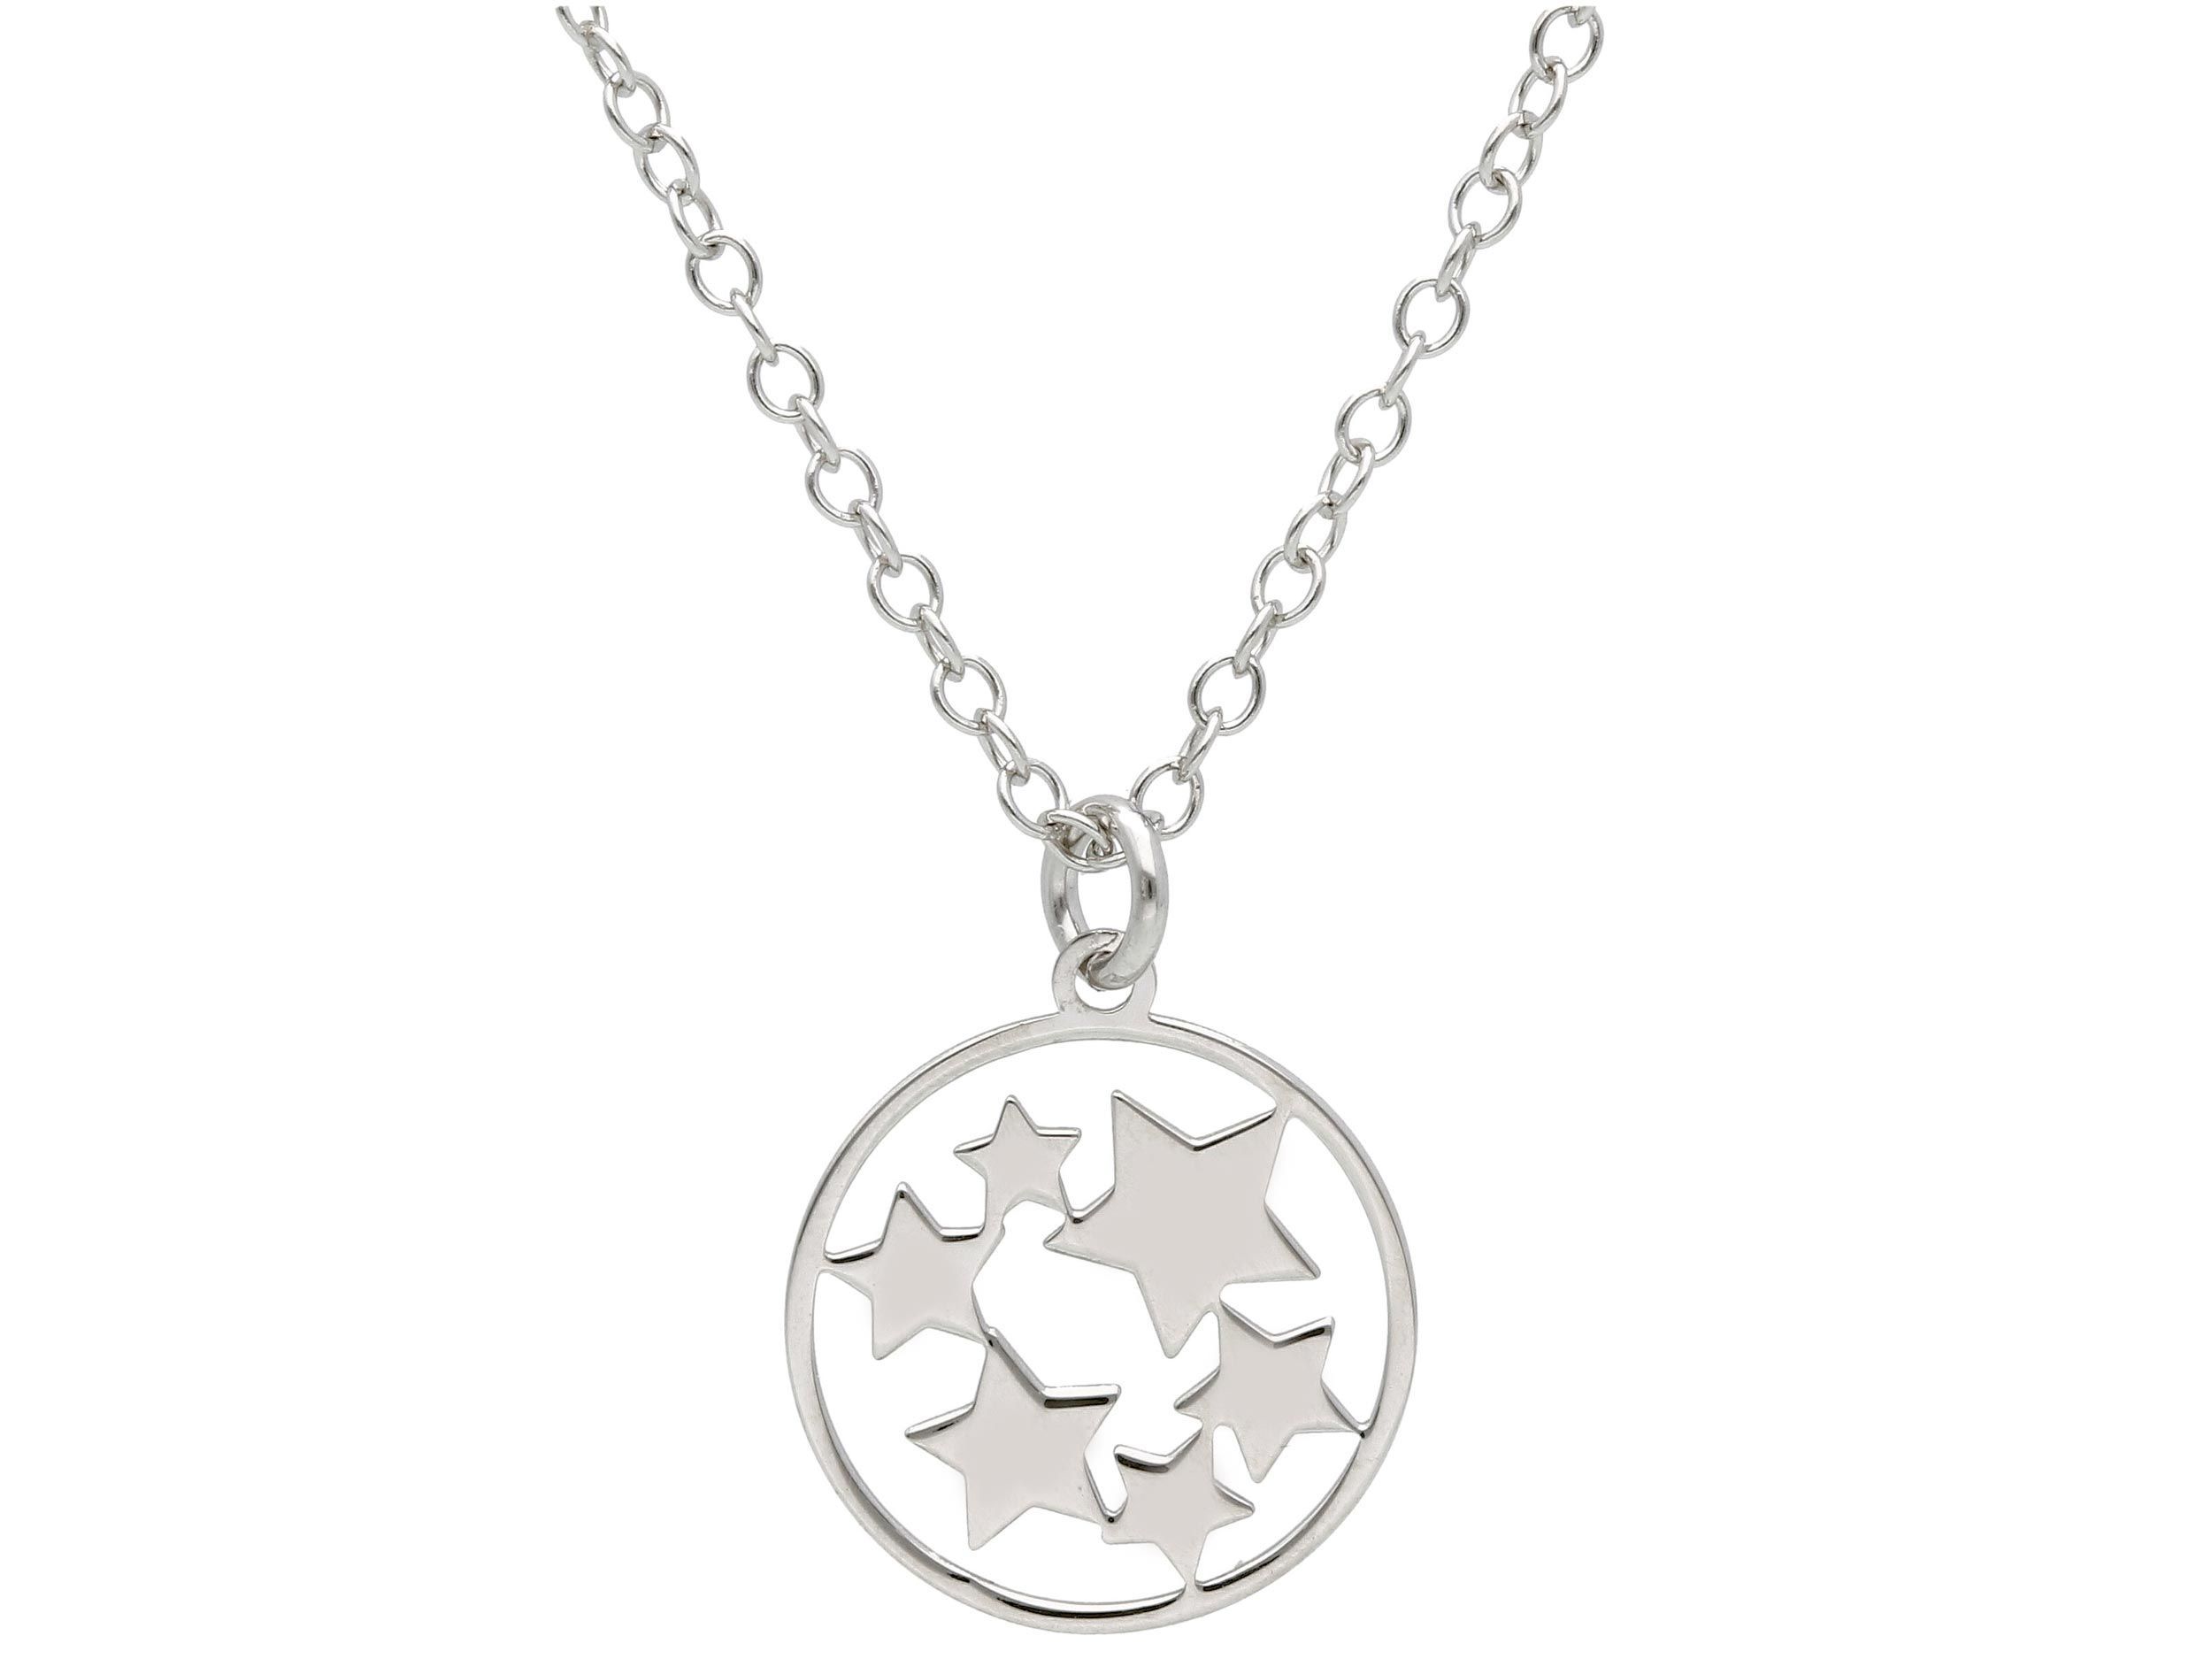  Platinum plated silver 925° Star necklace (code S265078)